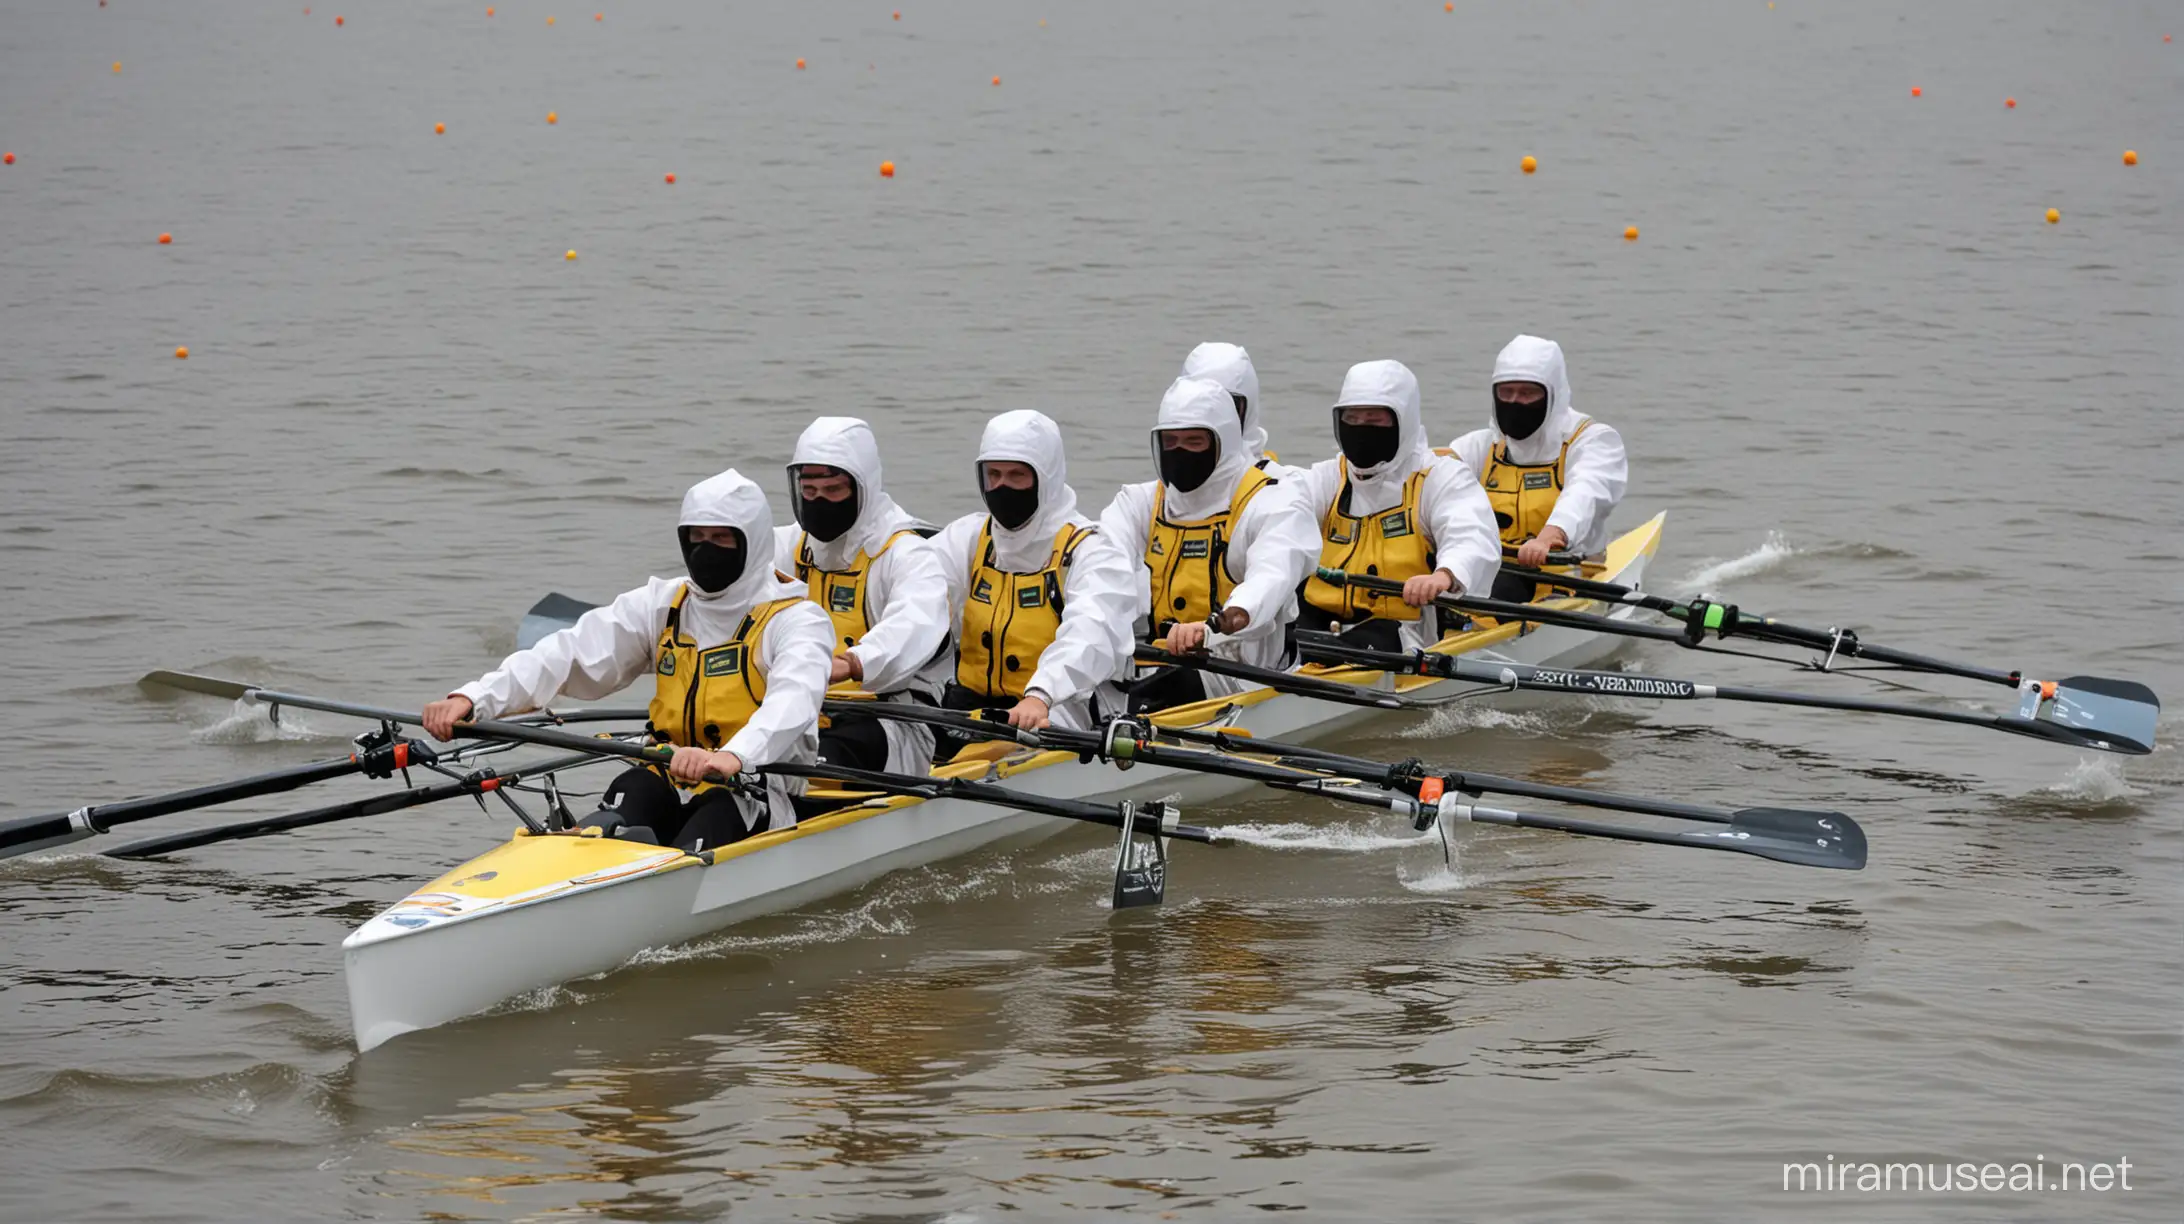 imagine a coxed 8 racing rowing boat crewed by rowers in hazmat suits